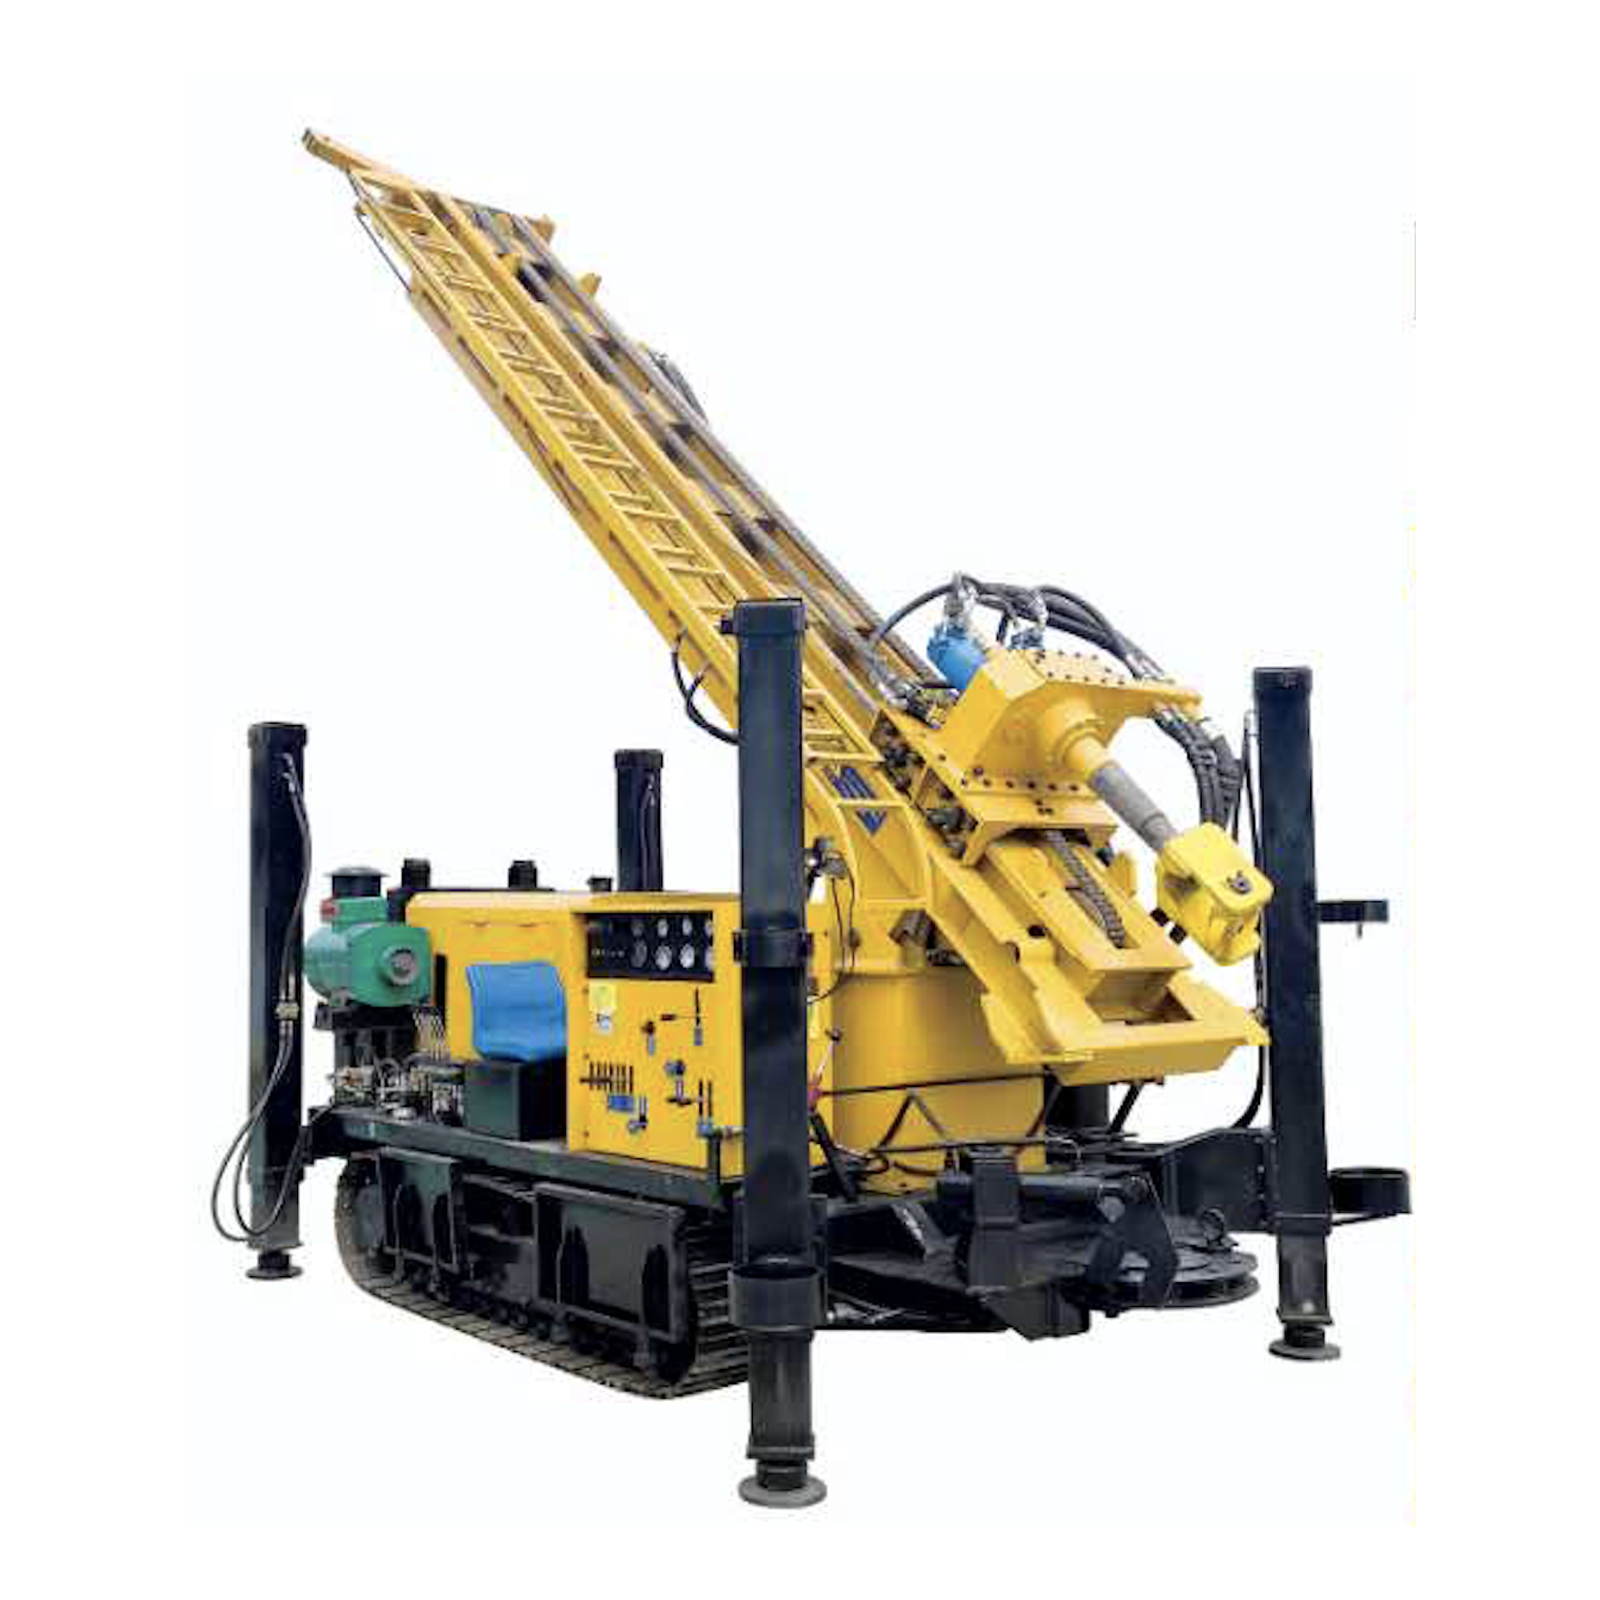 GL400S crawler water well drill rig